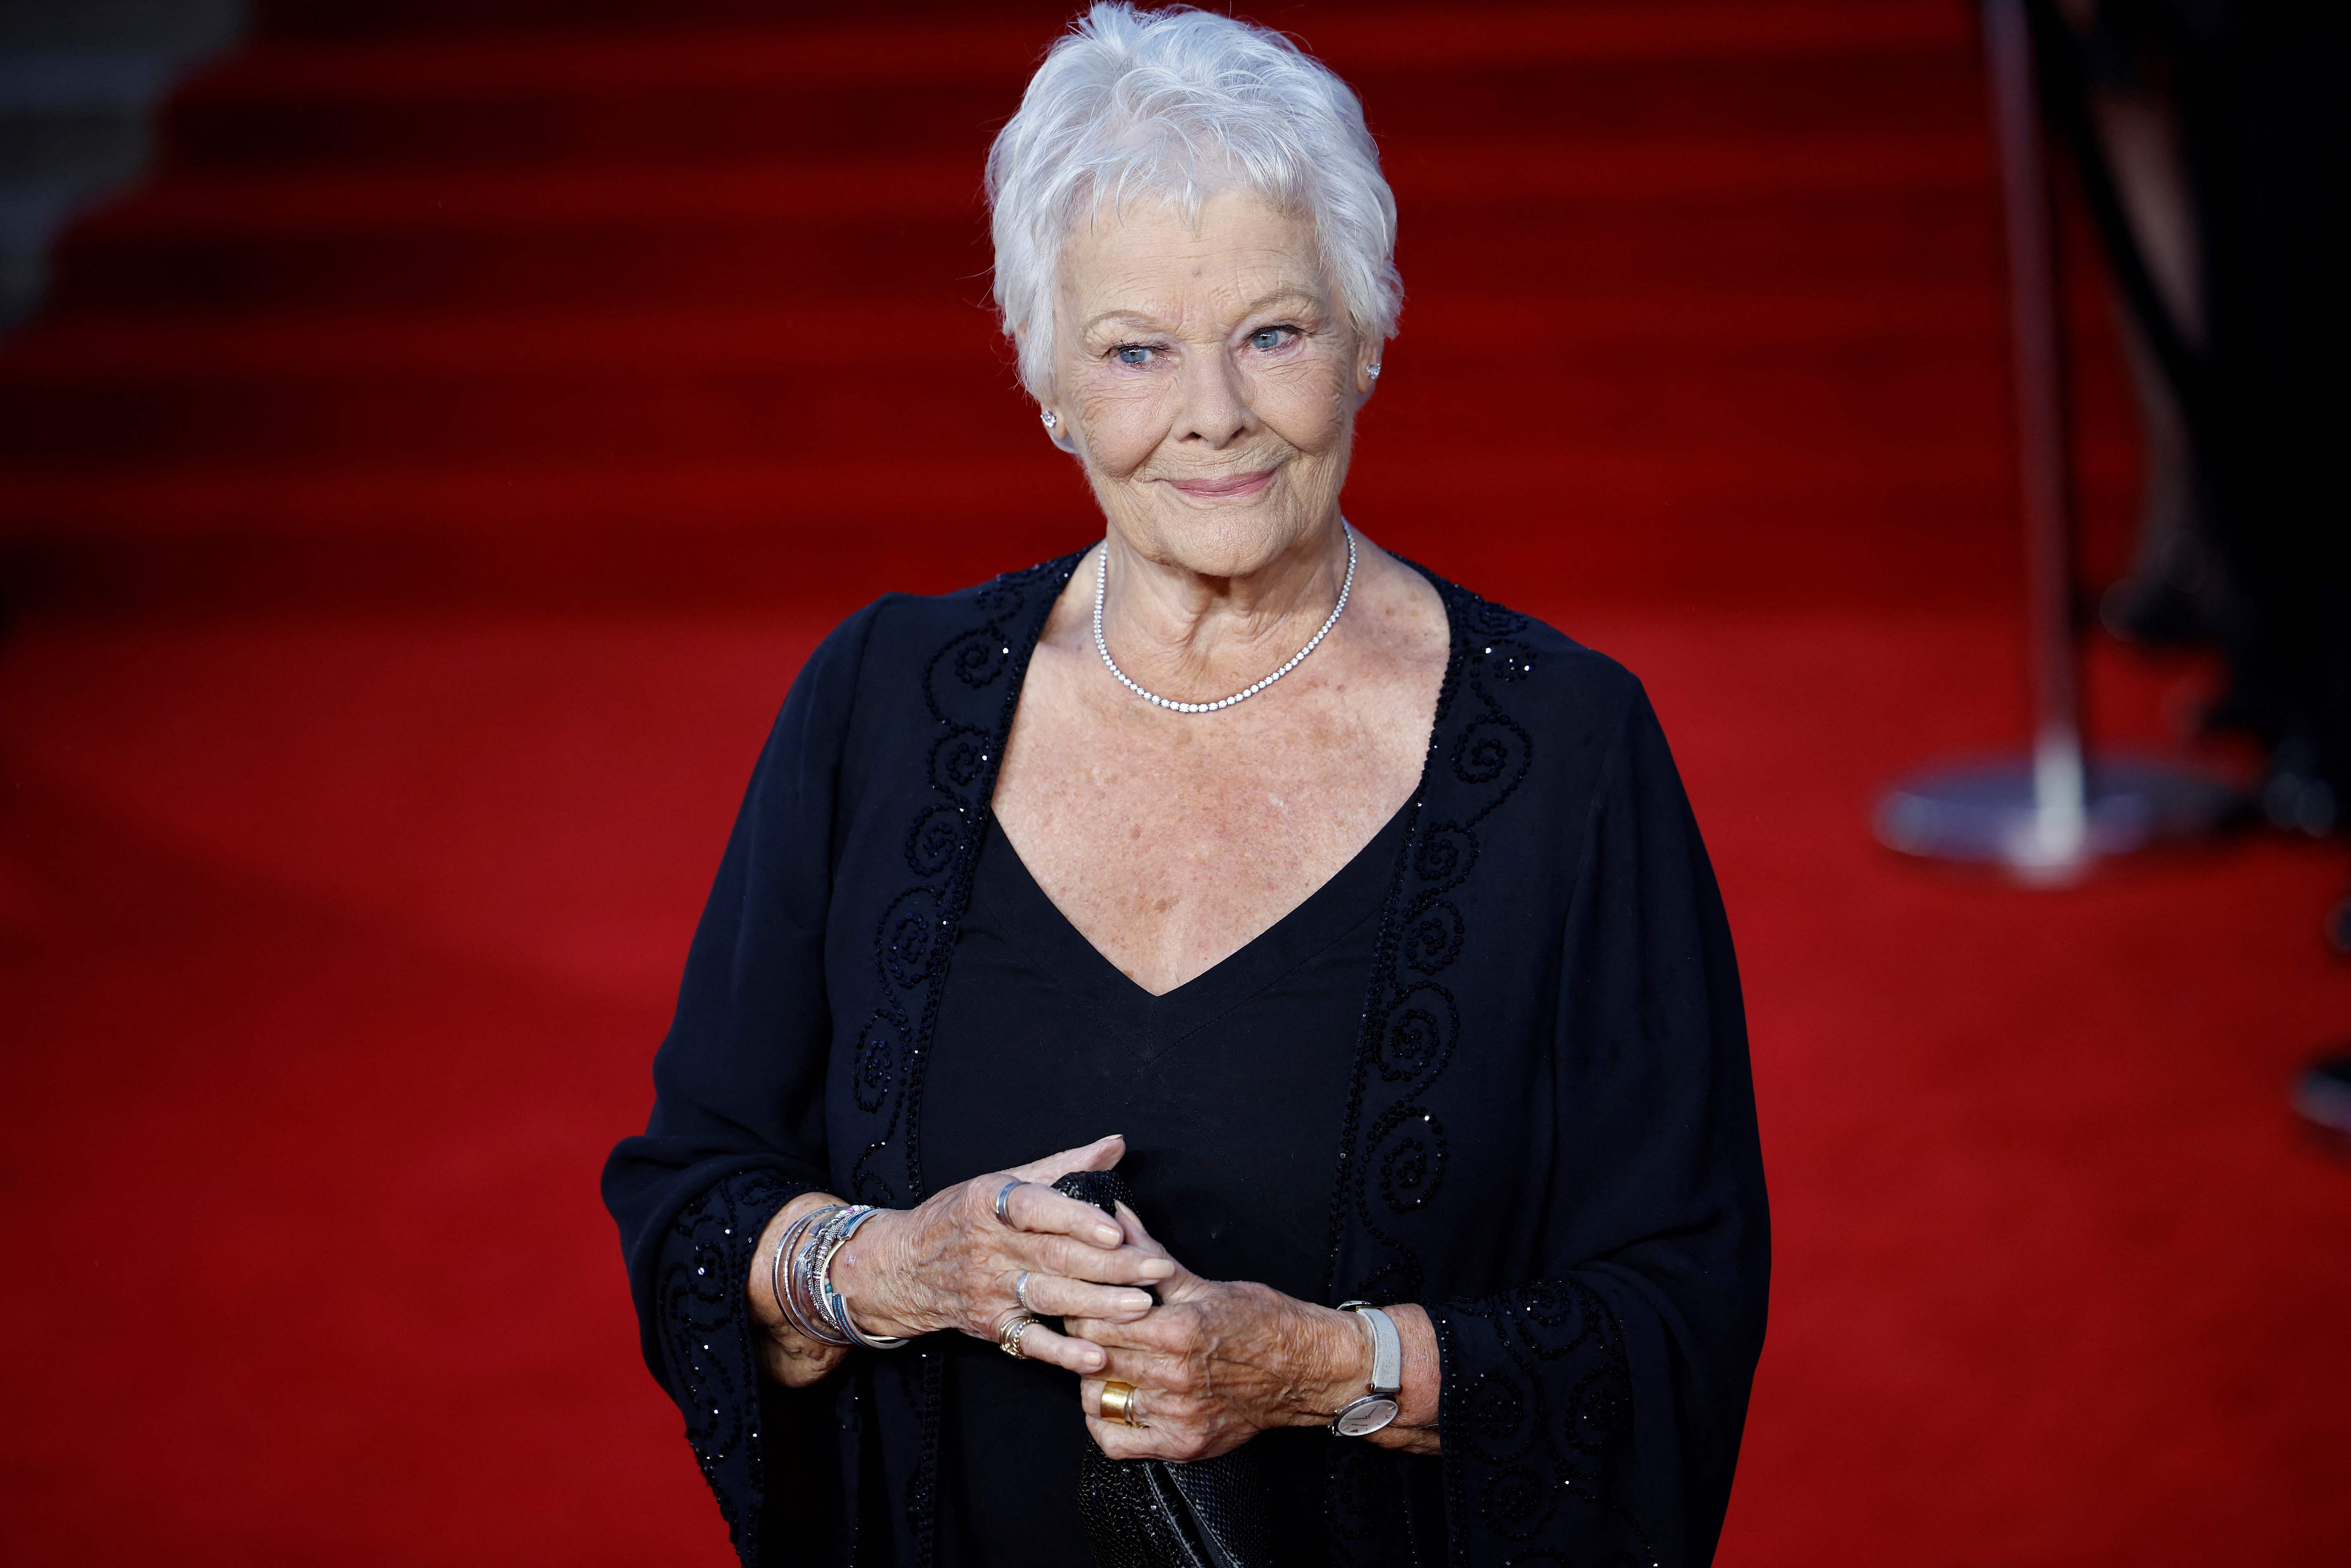 Dench at the premiere of ‘No Time to Die’ in 2021